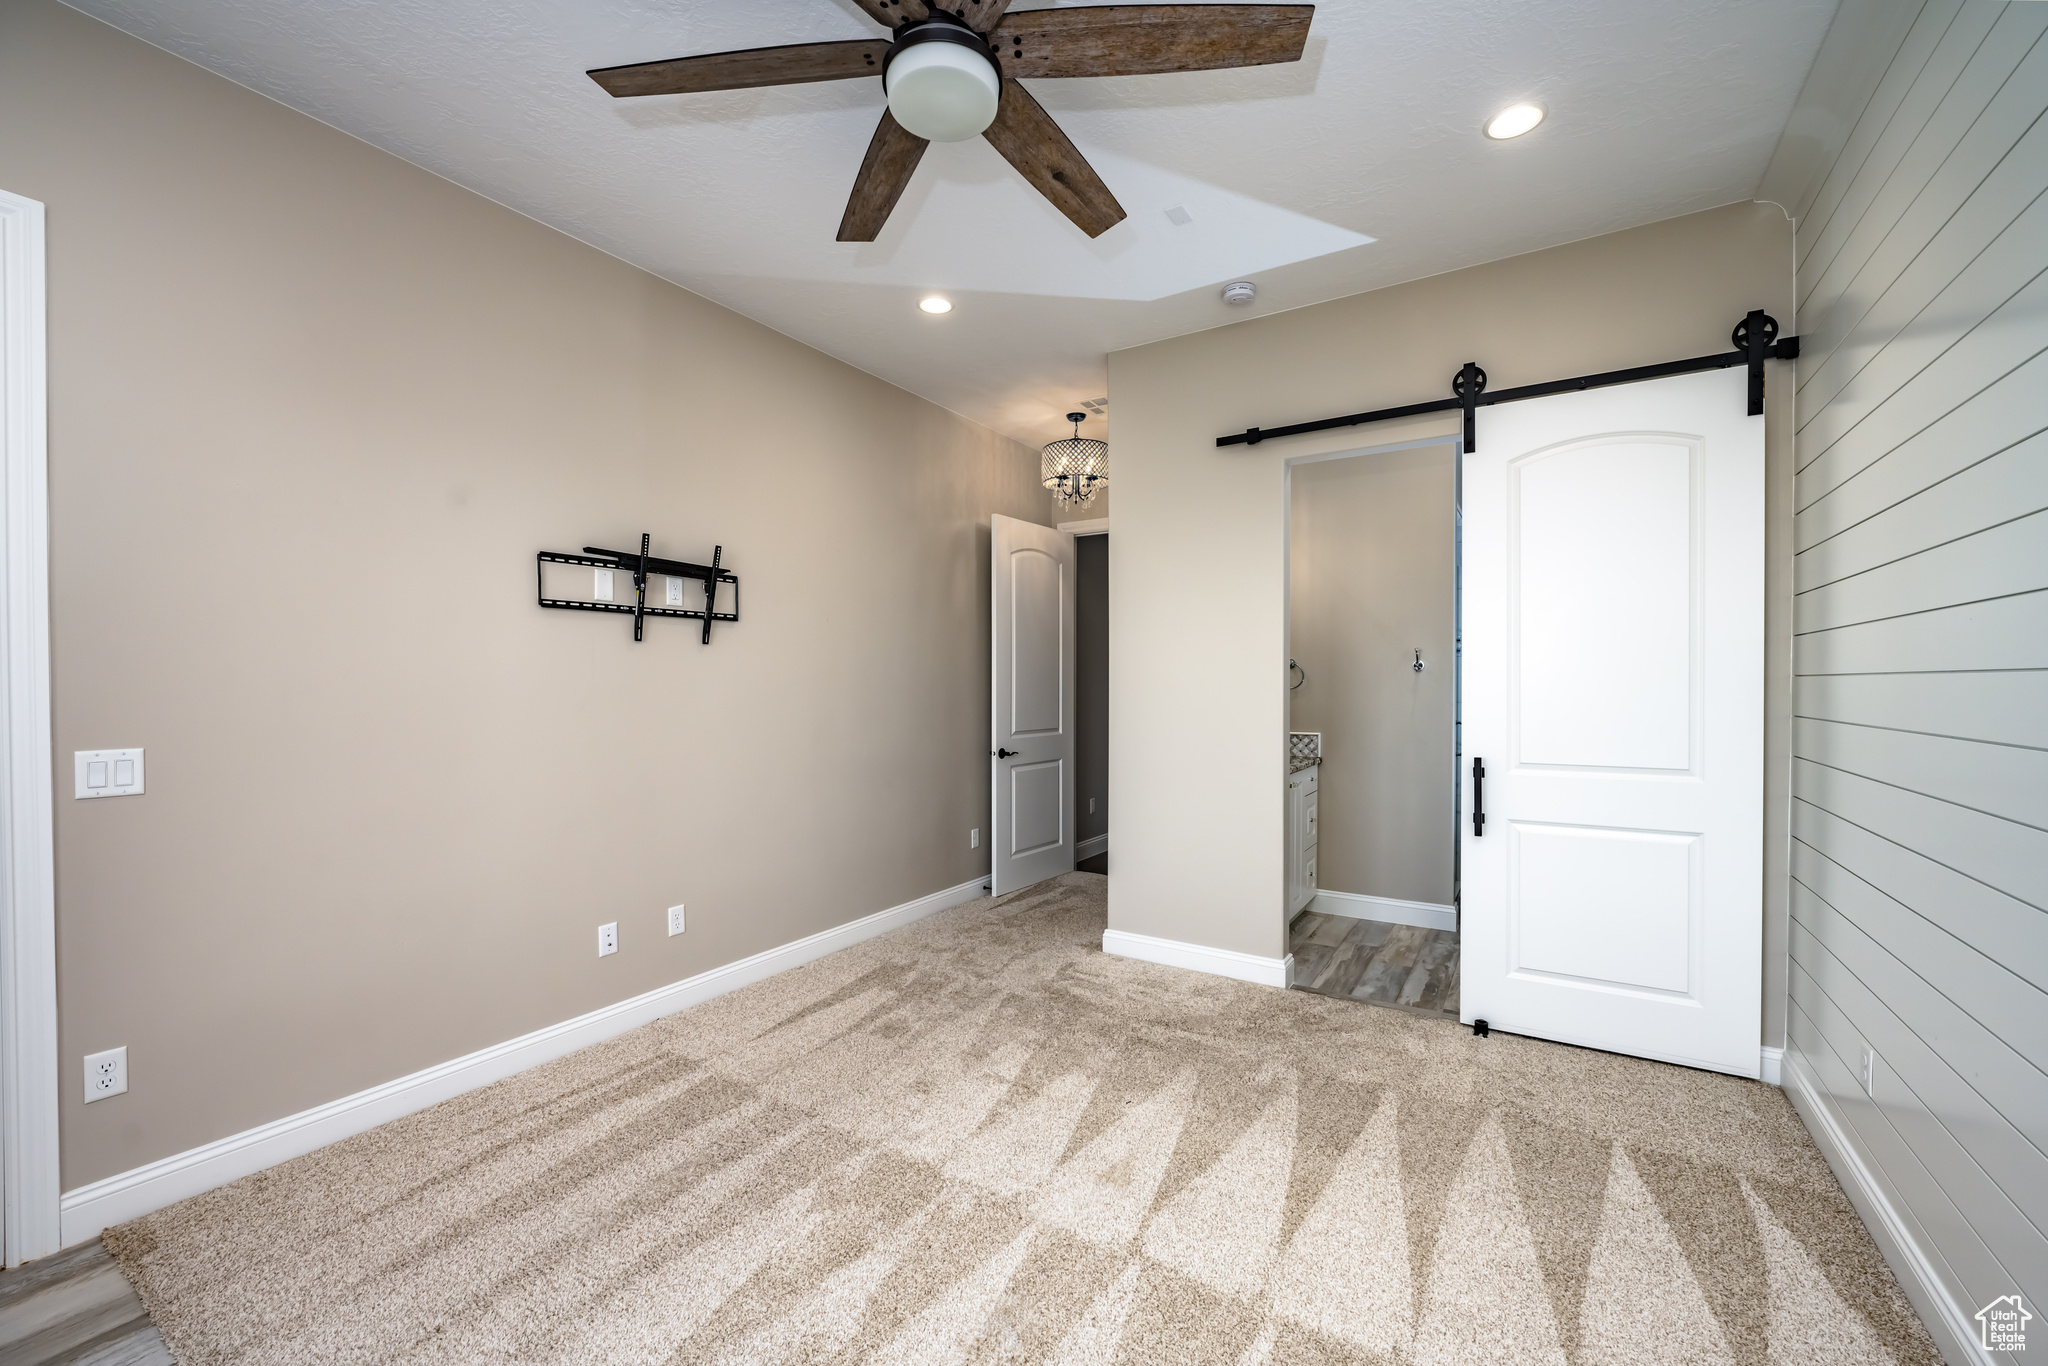 Unfurnished bedroom with light carpet, ceiling fan, and a barn door